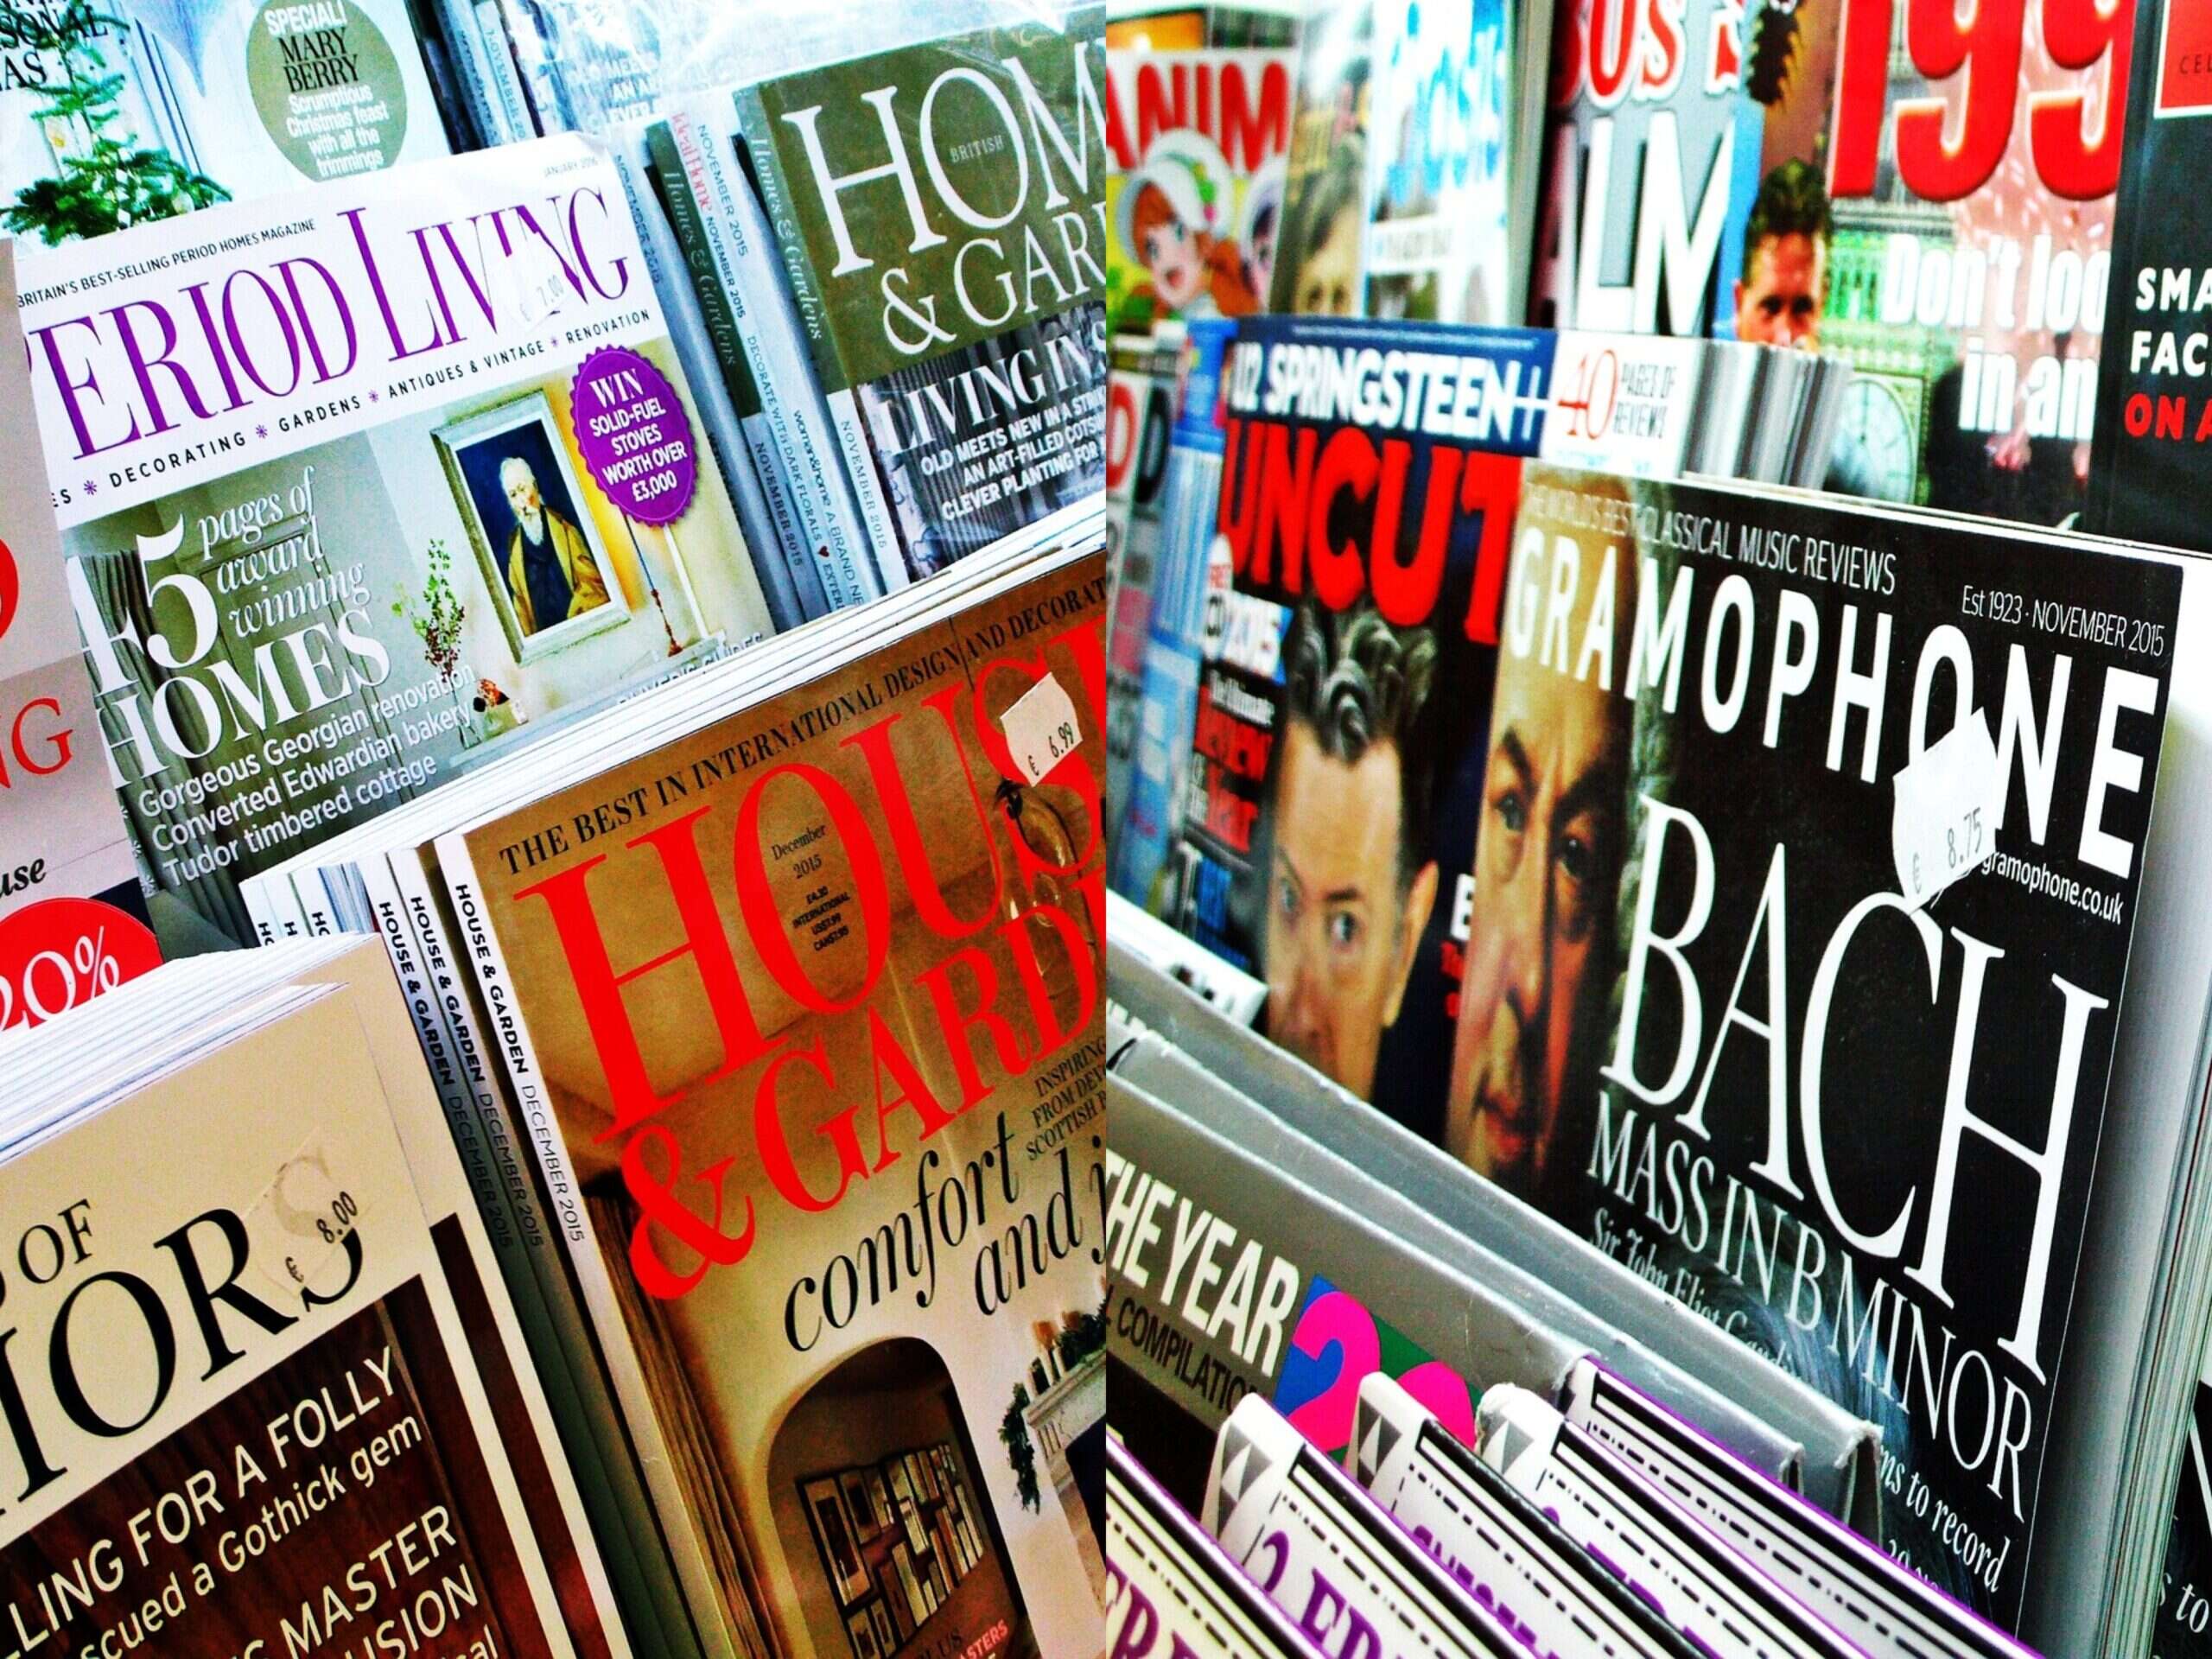 Traffic uplift no compensation for loss of ad revenue, says head of mag publisher's body